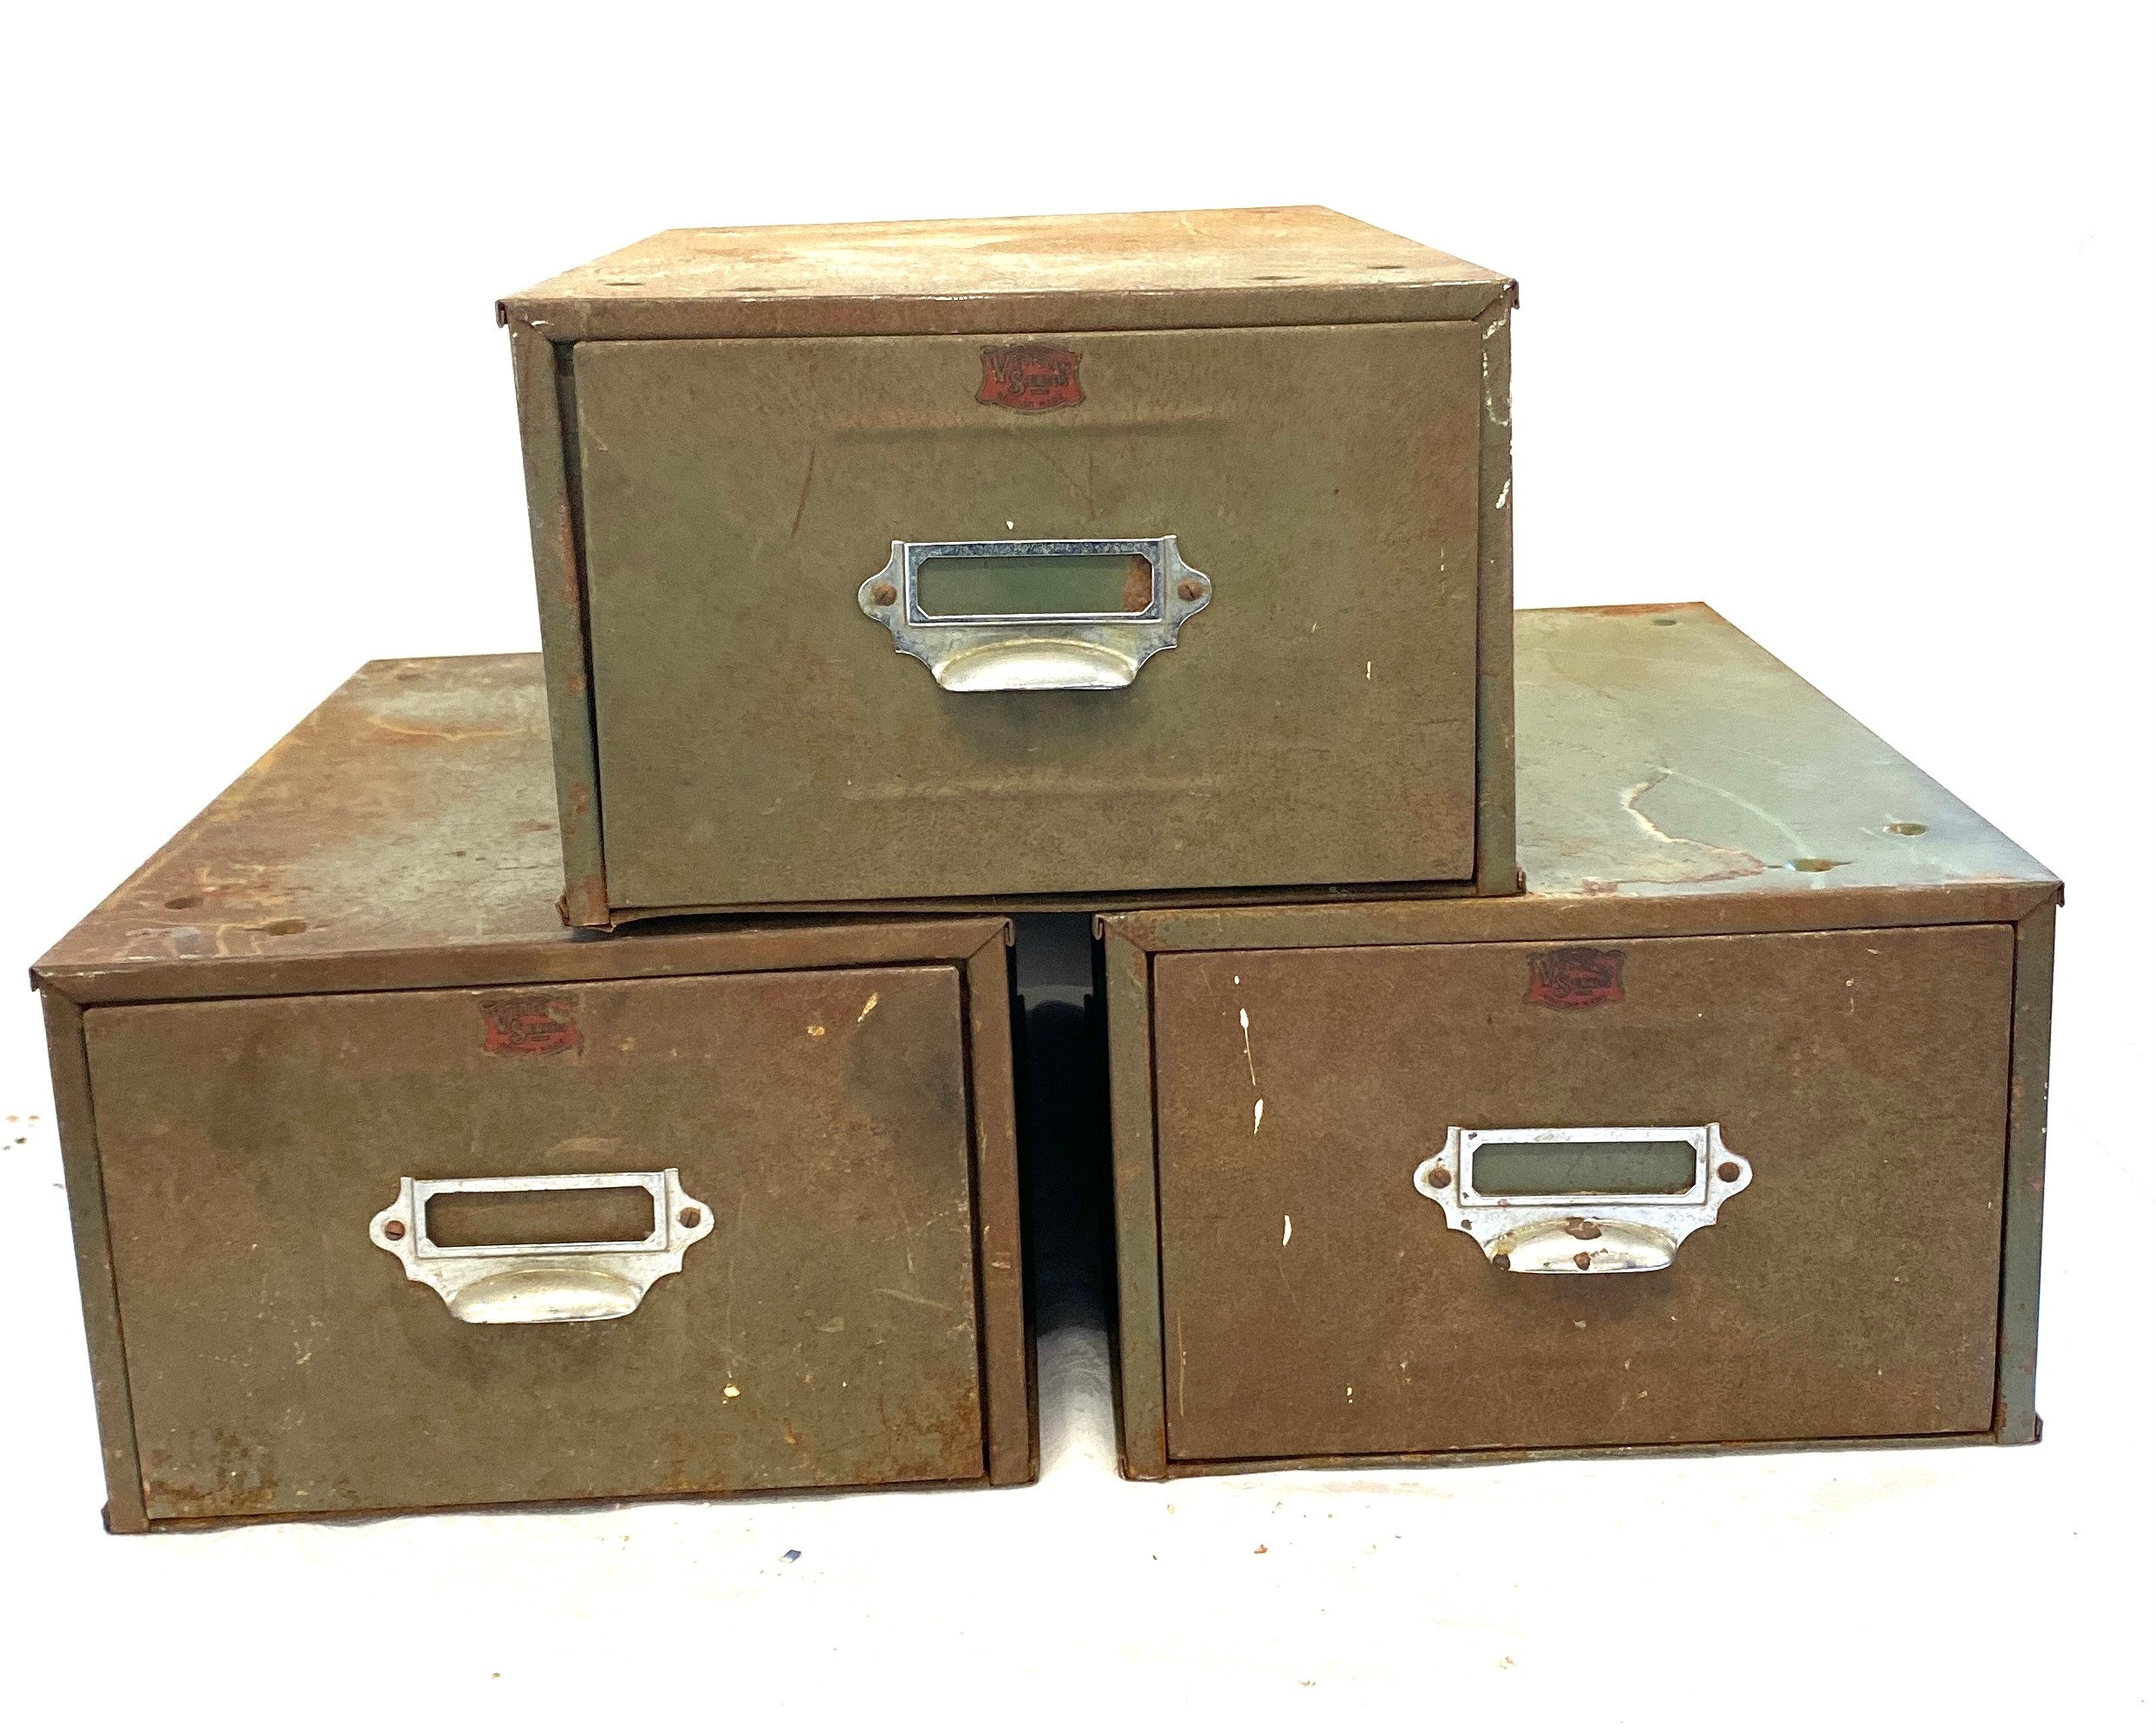 3 Veteren Metal industrial index drawers, approximate measurement of each draw: Height 7 inches,